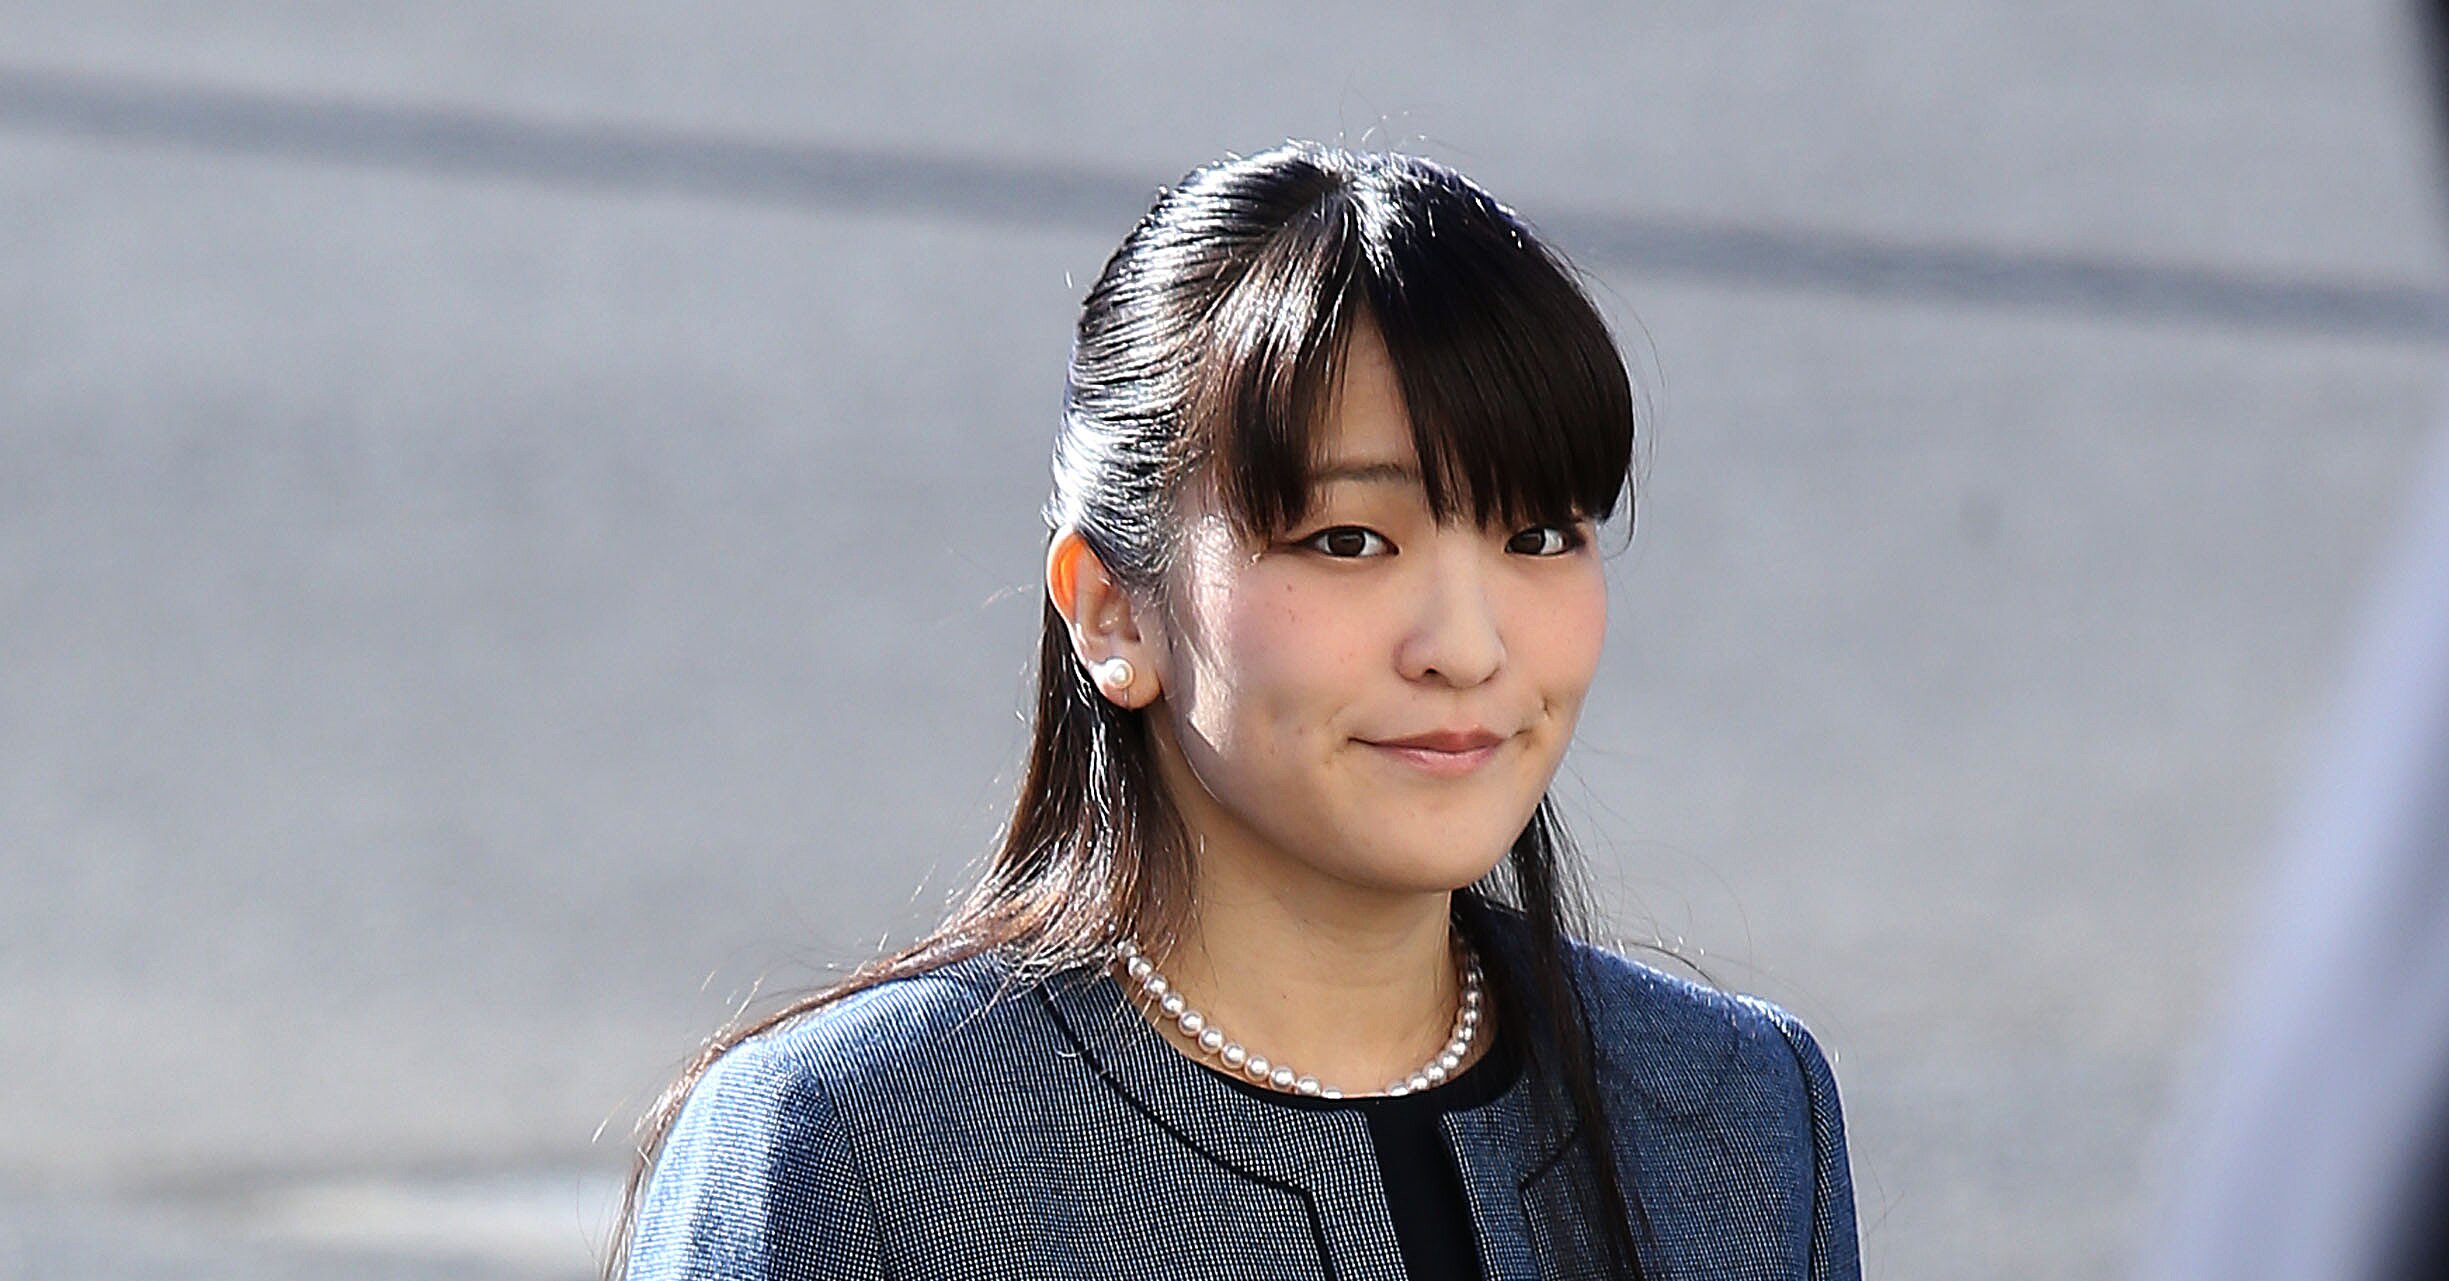 Princess Mako Has Officially Renounced Her Royal Title for Love